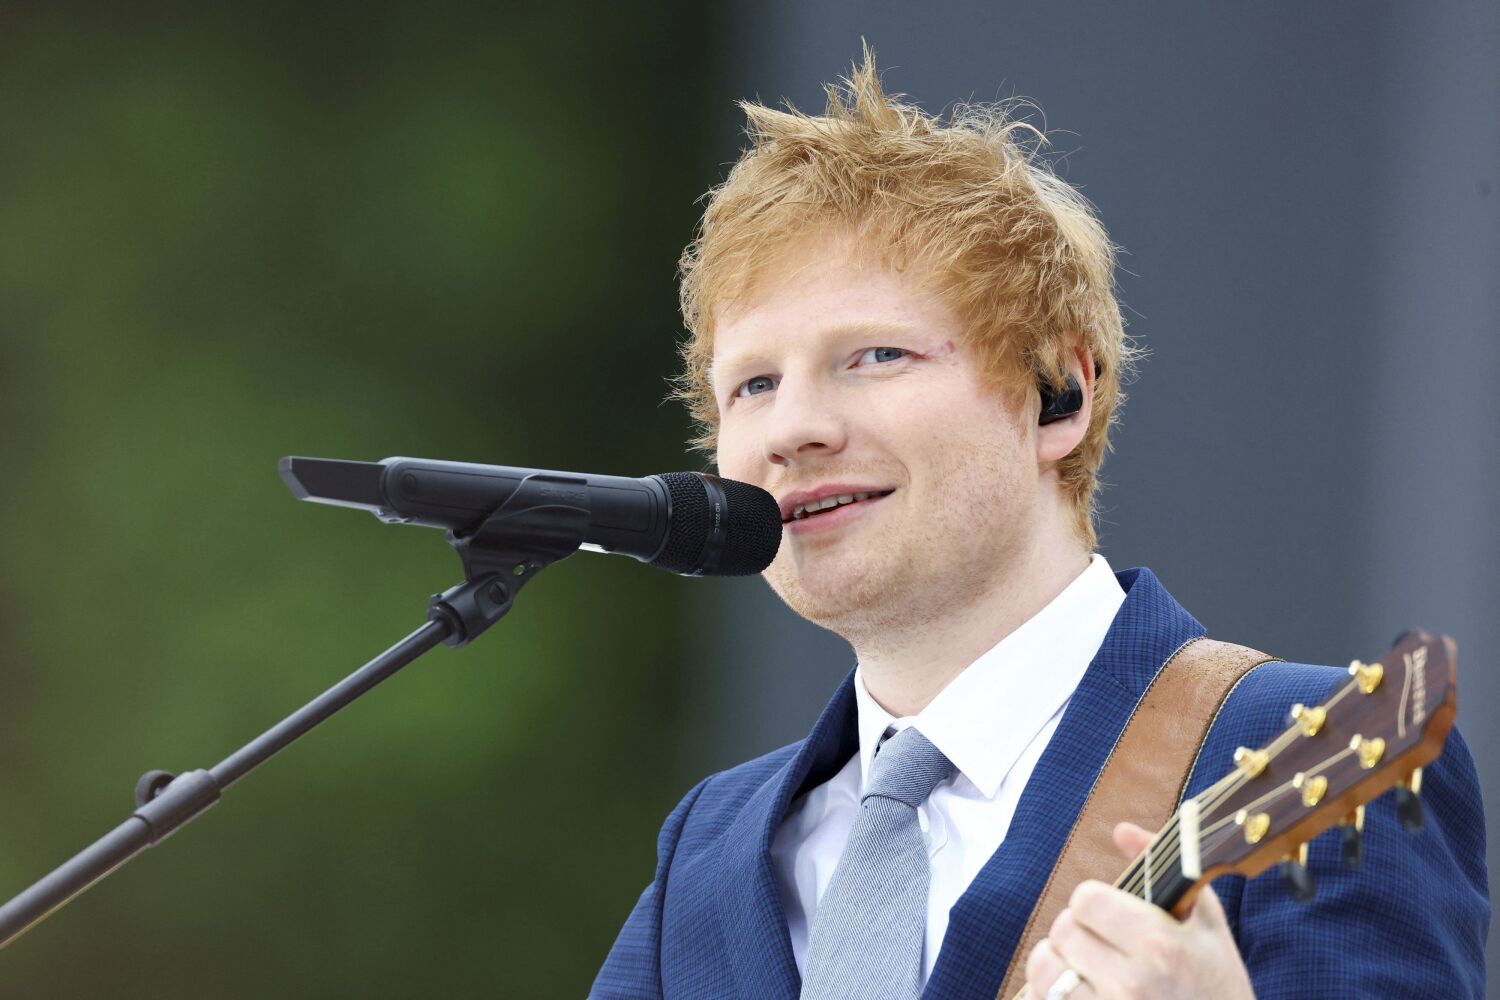 You heard it through the grapevine: The Ed Sheeran-Marvin Gaye trial starts today